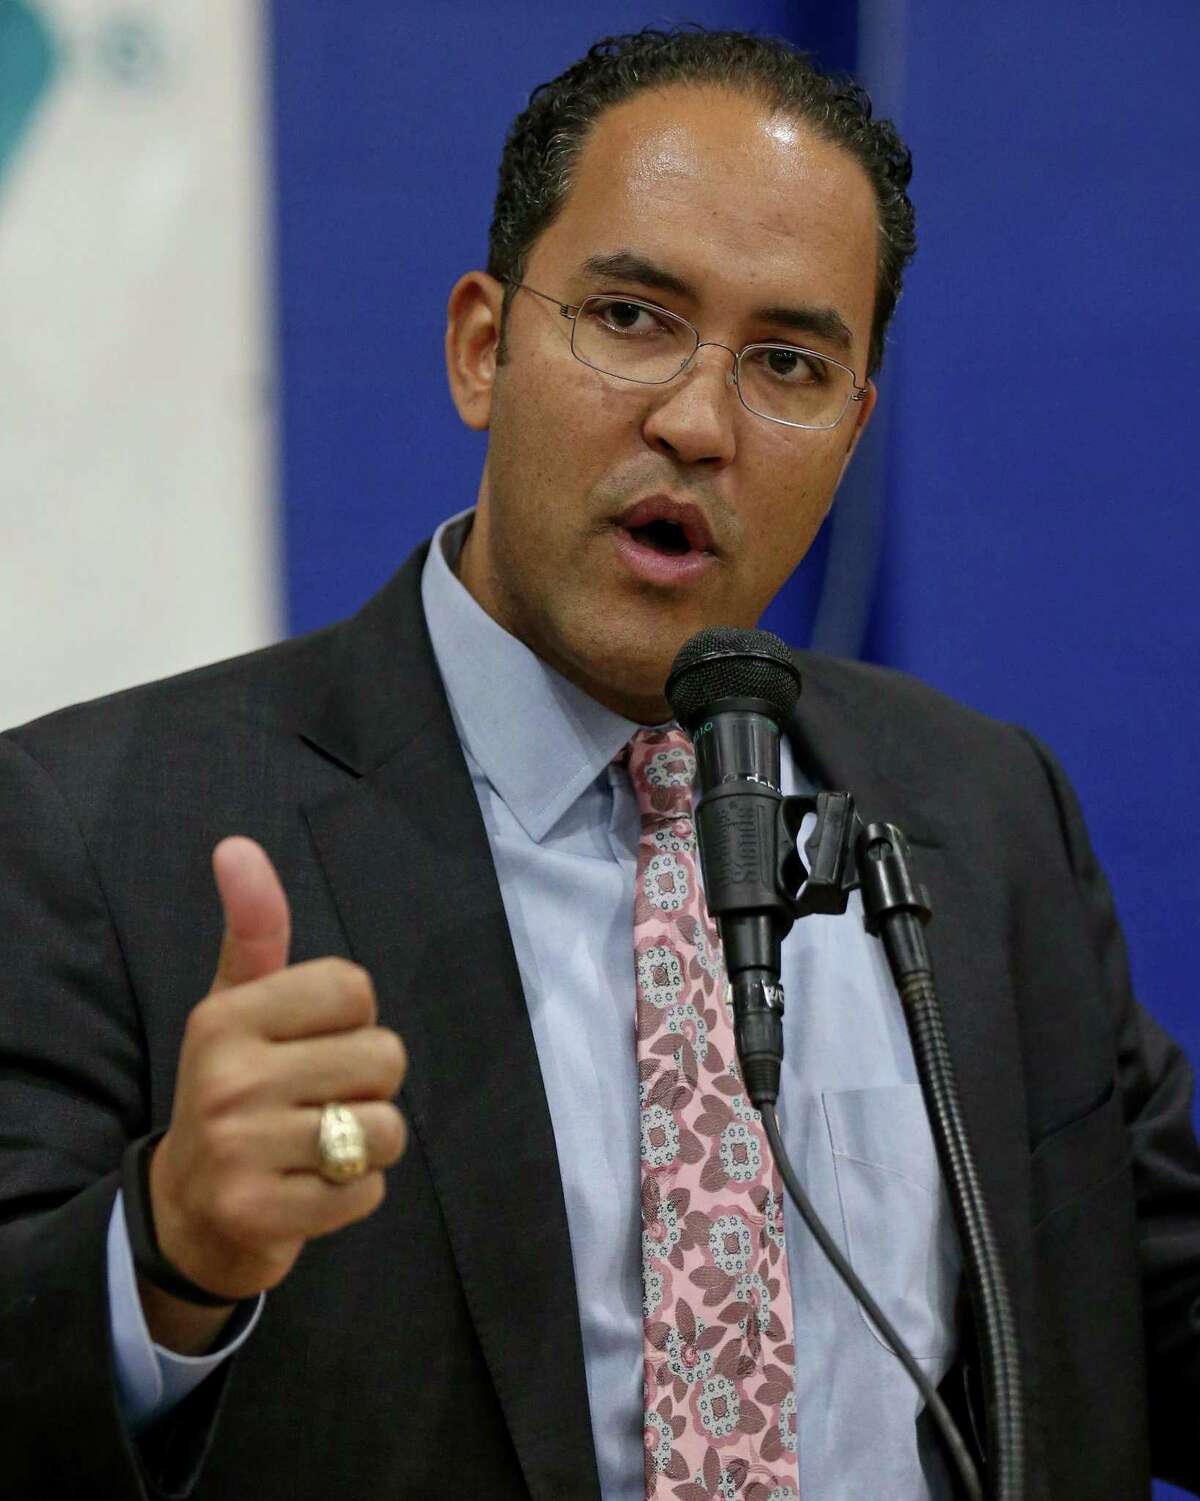 U.S. Rep. Will Hurd, R-Helotes, speaks during the Rev. Dr. Martin Luther King, Jr. Wreath-Laying Ceremony held Sunday Jan. 15, 2017 at the Davis-Scott Family YMCA.